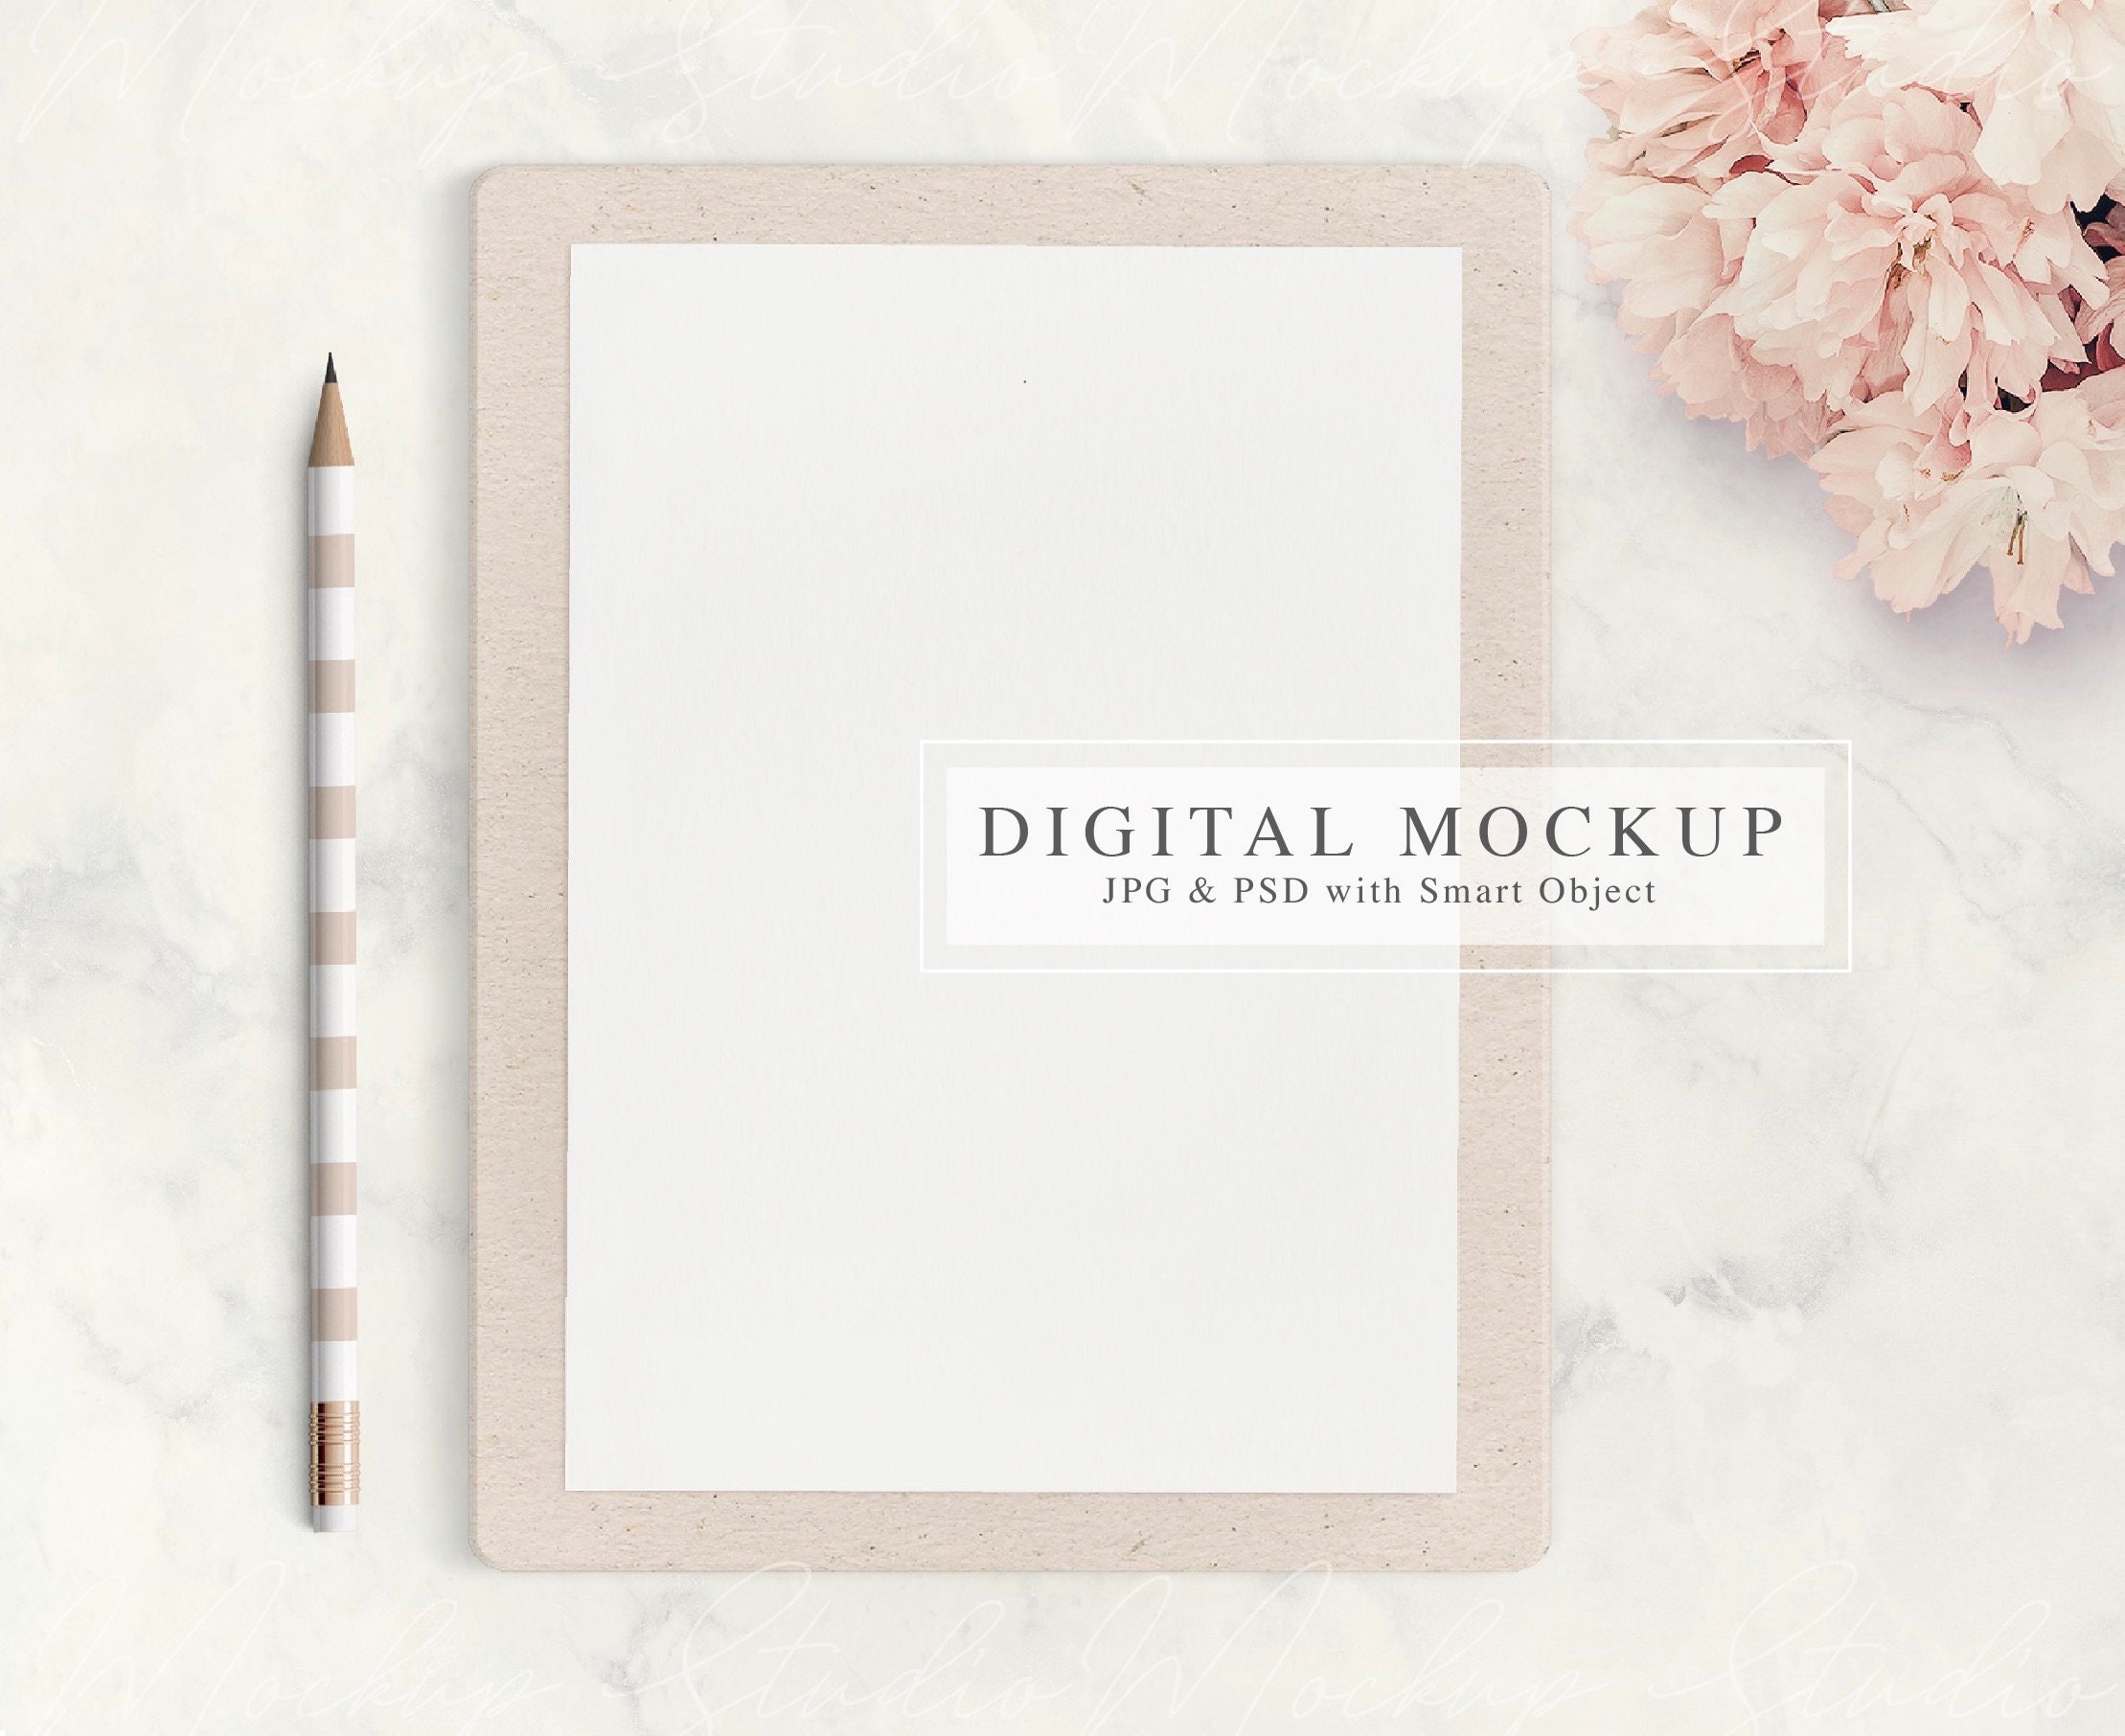 Dye Sublimation 9 X 12.5 Basic Clipboard Mockup Add Your Own Image and  Background 